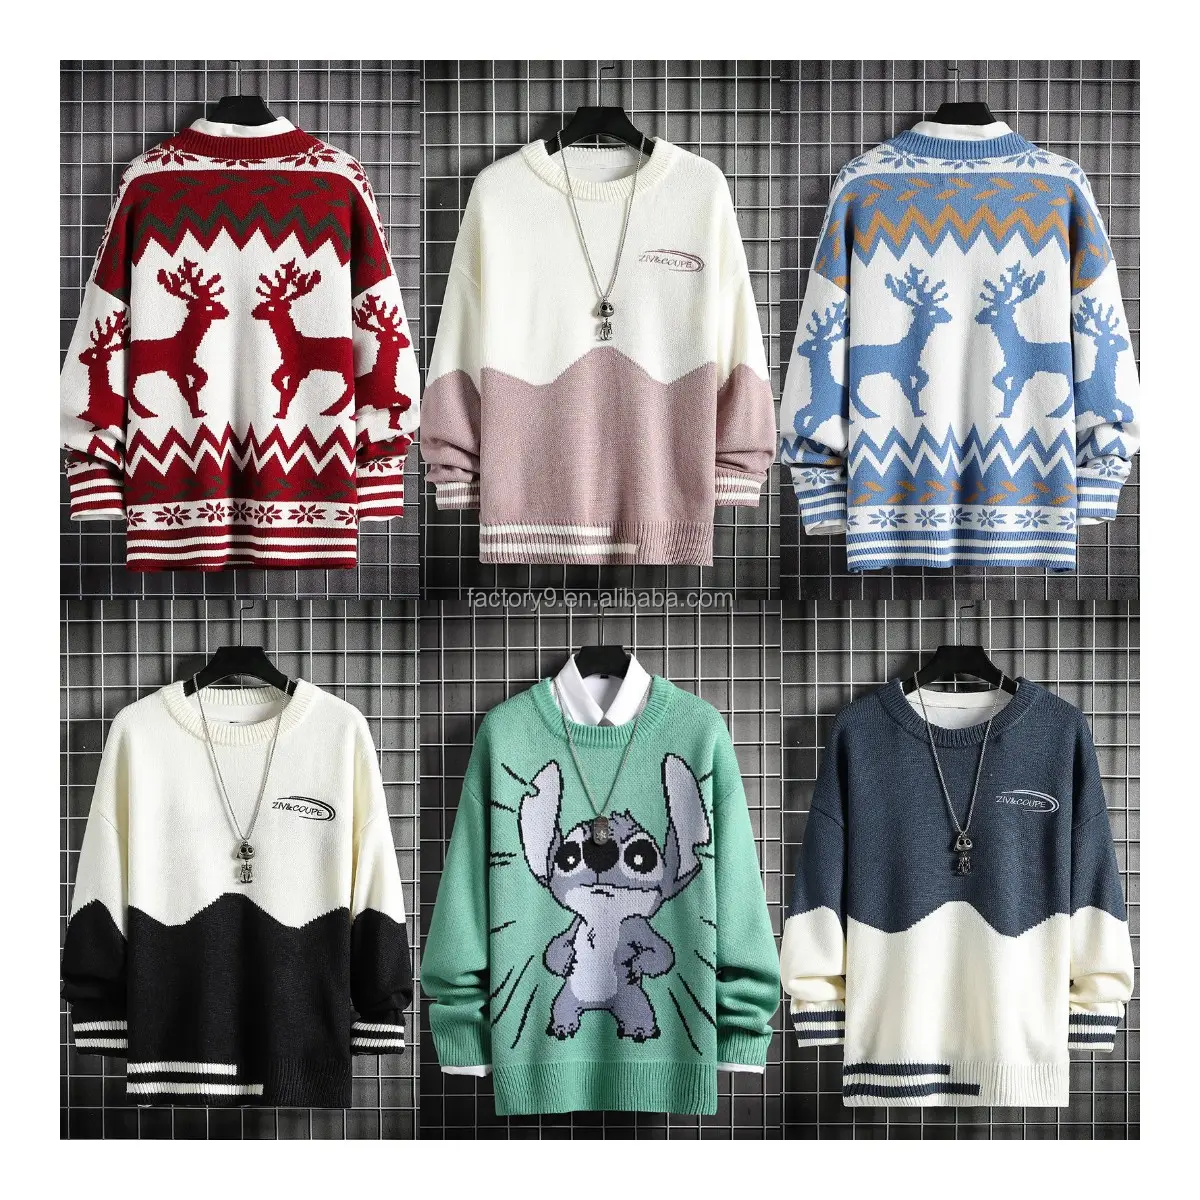 Winter fashion men's Christmas Sweater custom sweater high collar knitted long sleeve men's knitted sweater